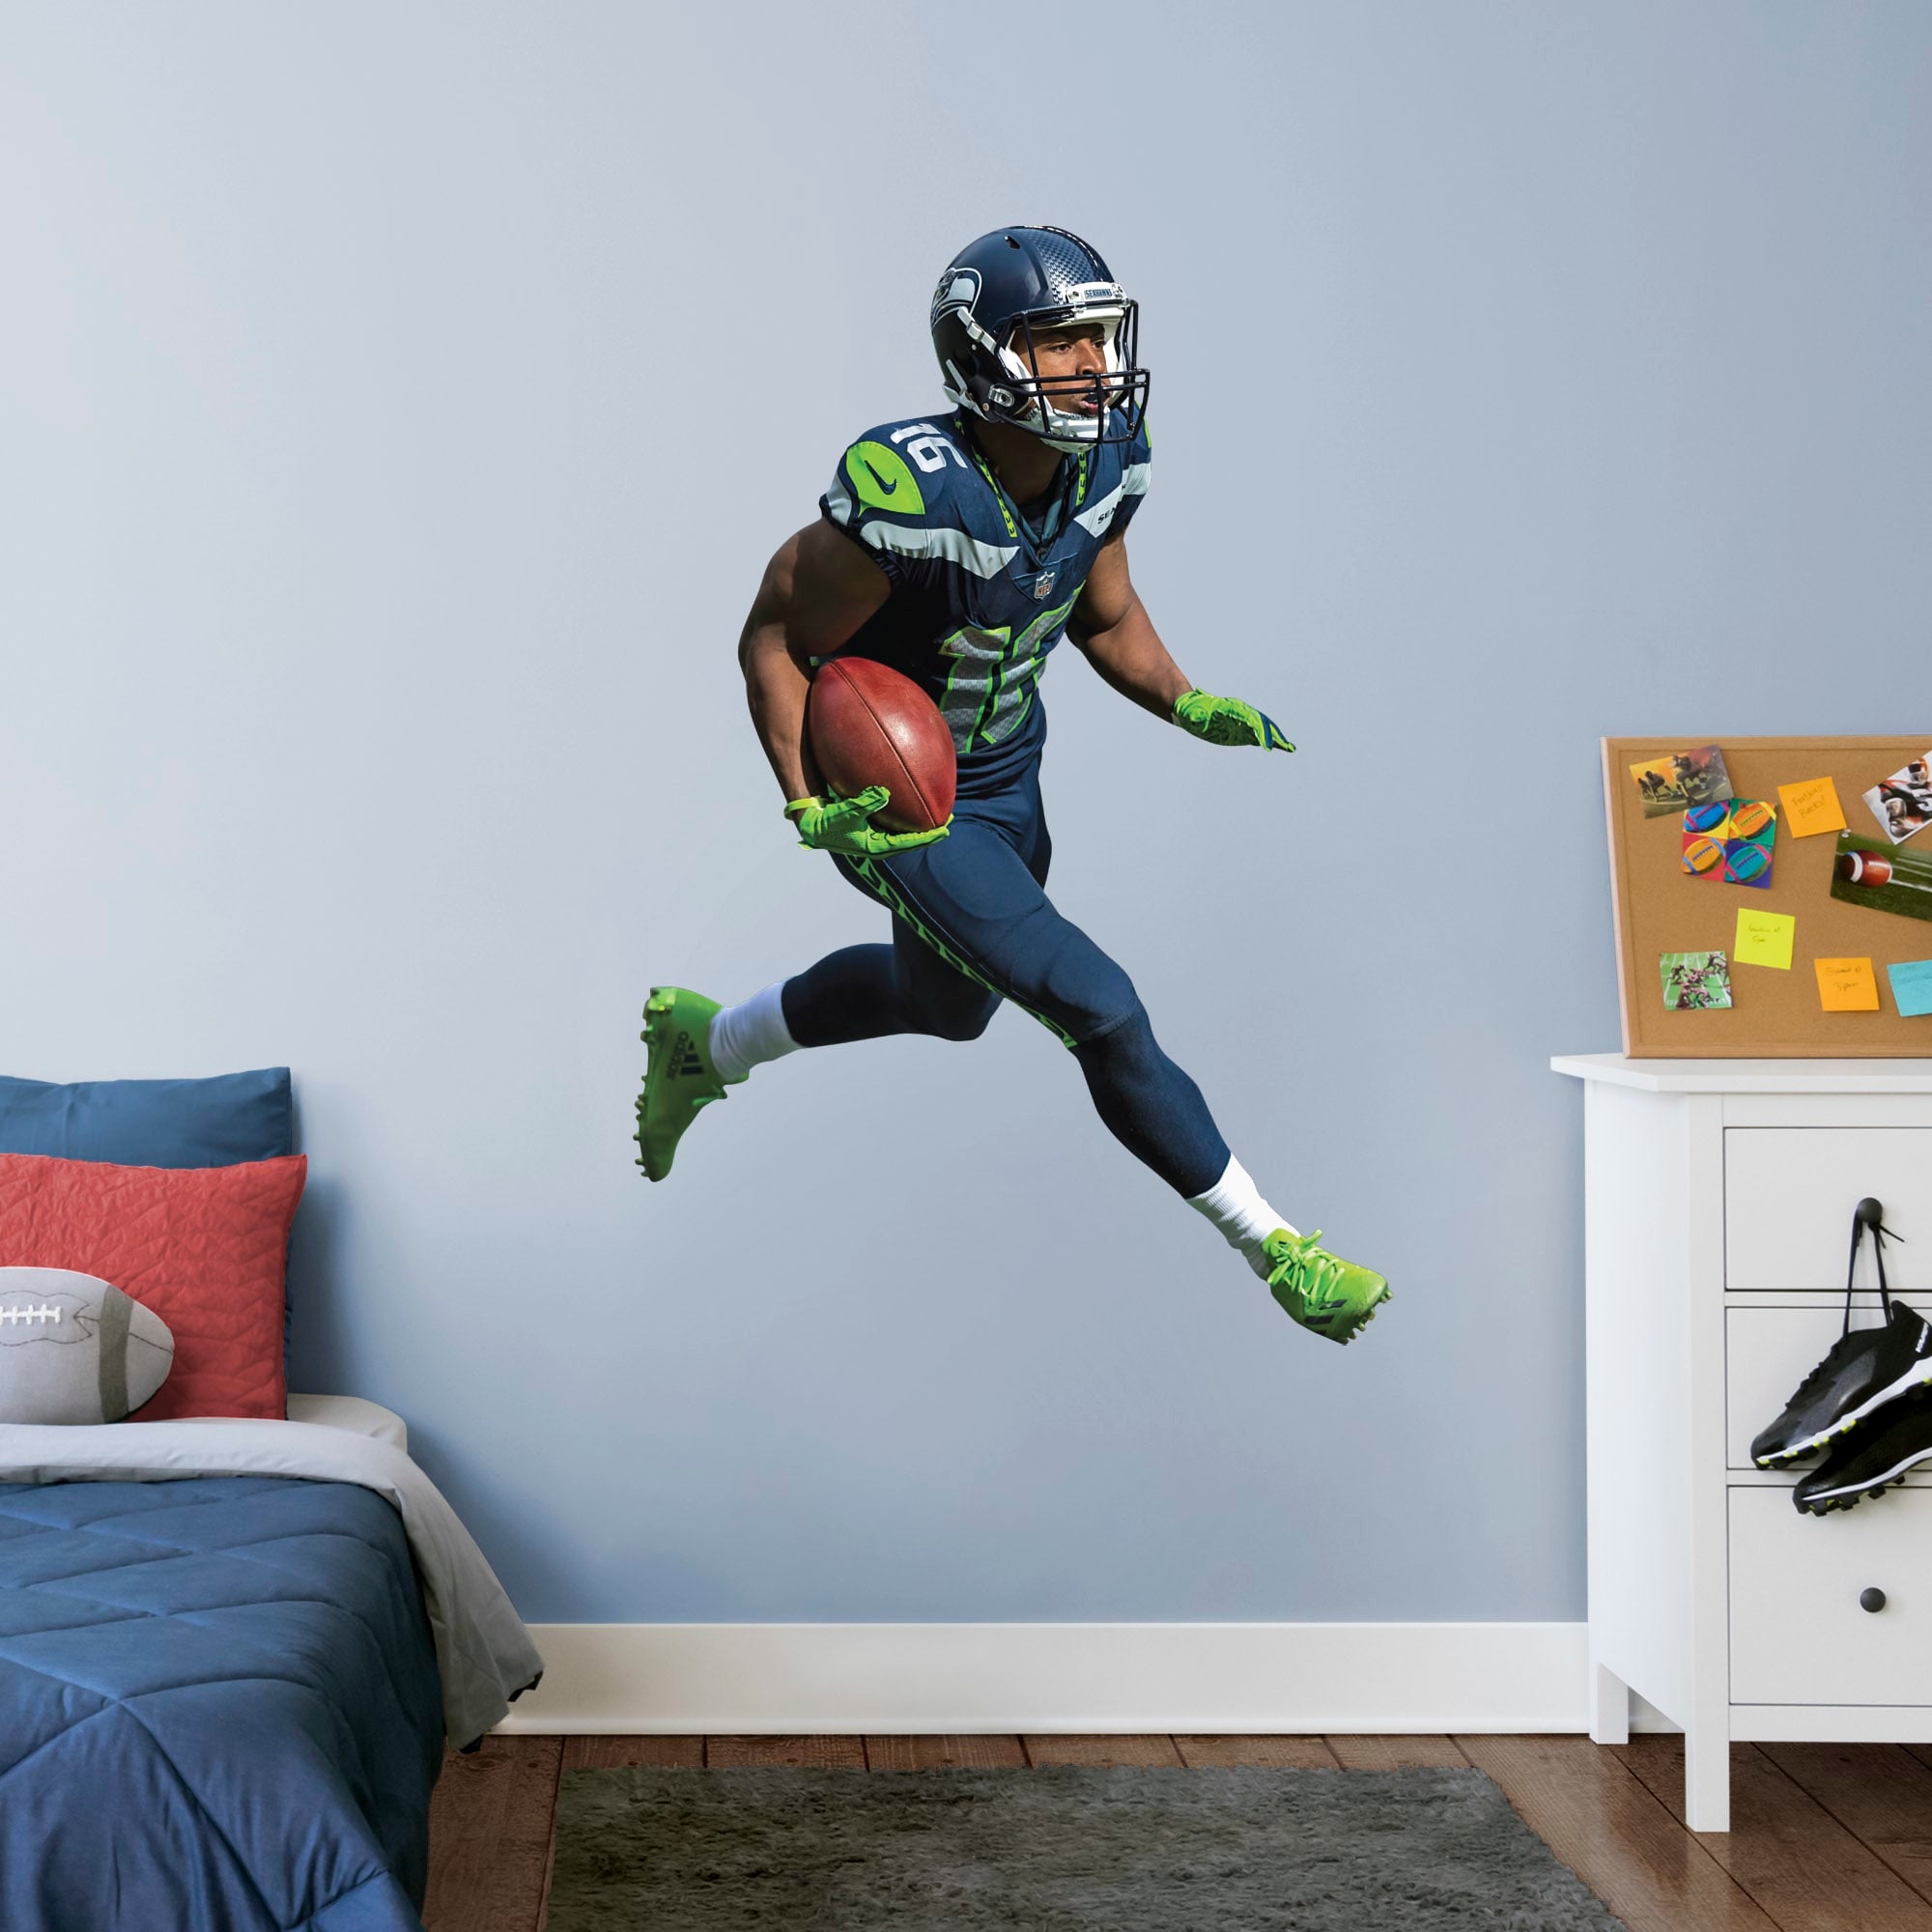 Tyler Lockett for Seattle Seahawks - Officially Licensed NFL Removable Wall Decal Giant Athlete + 2 Decals (34"W x 50"H) by Fath